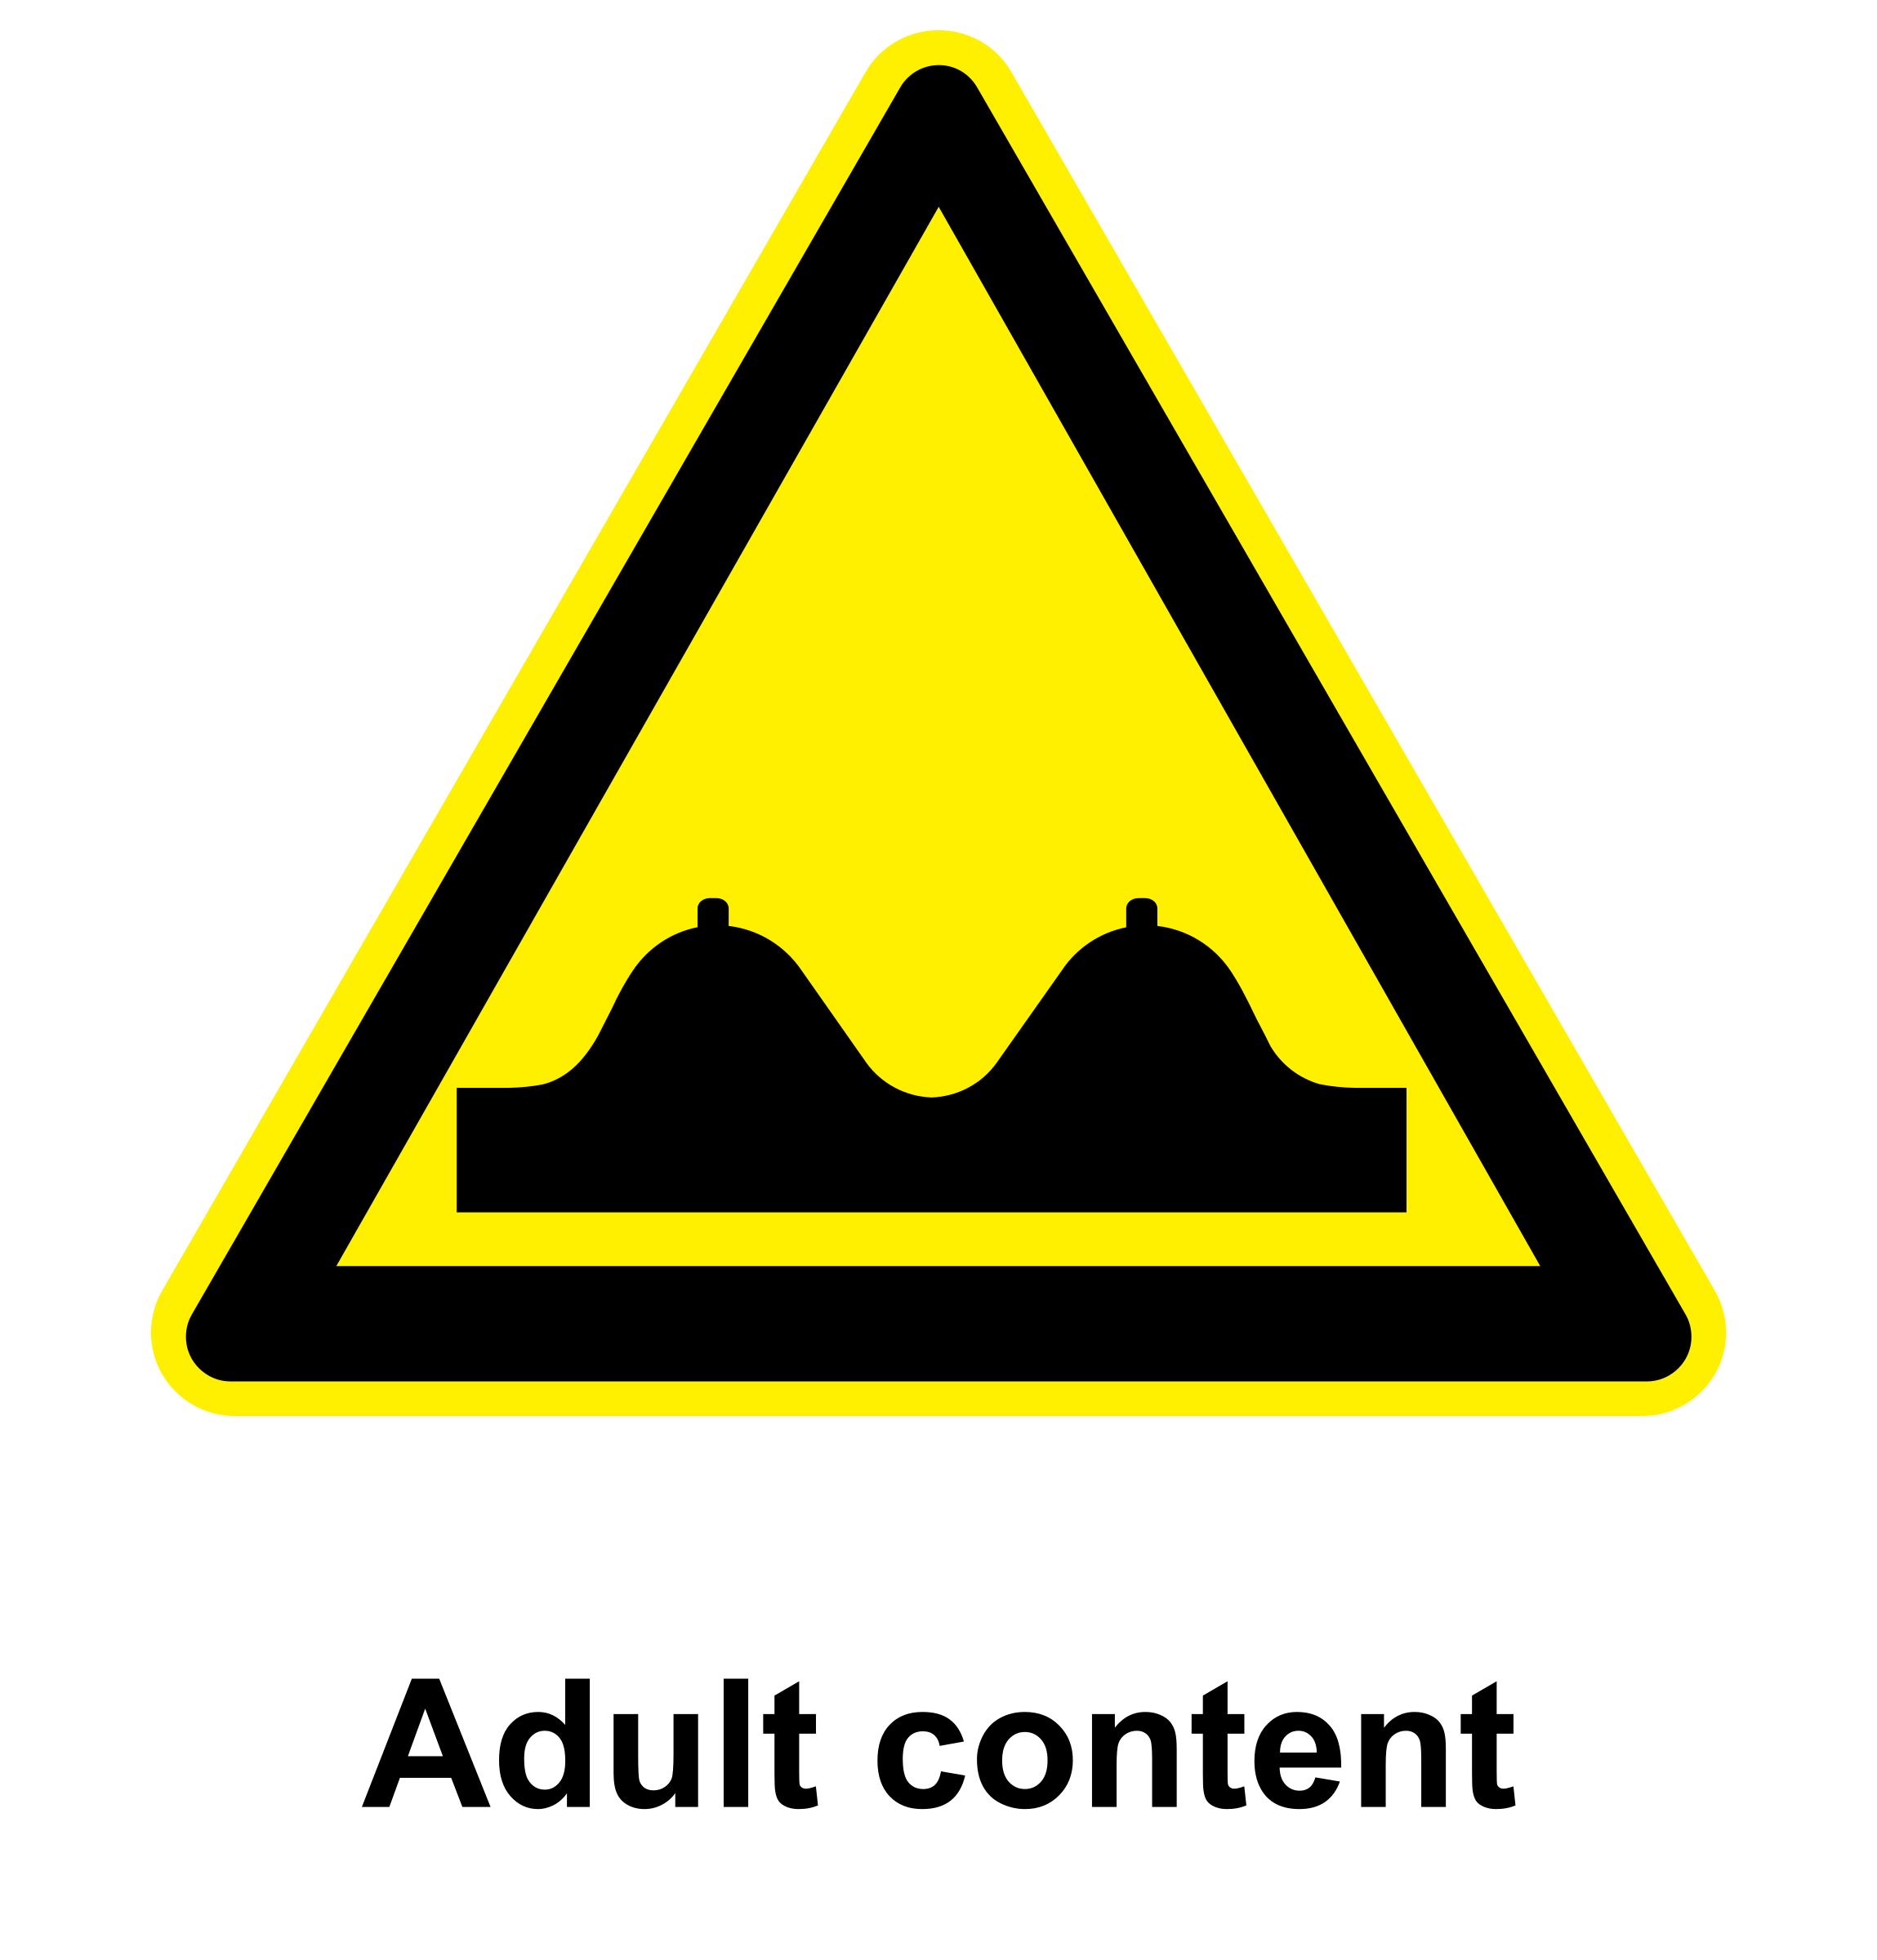 Adult content warning sign png